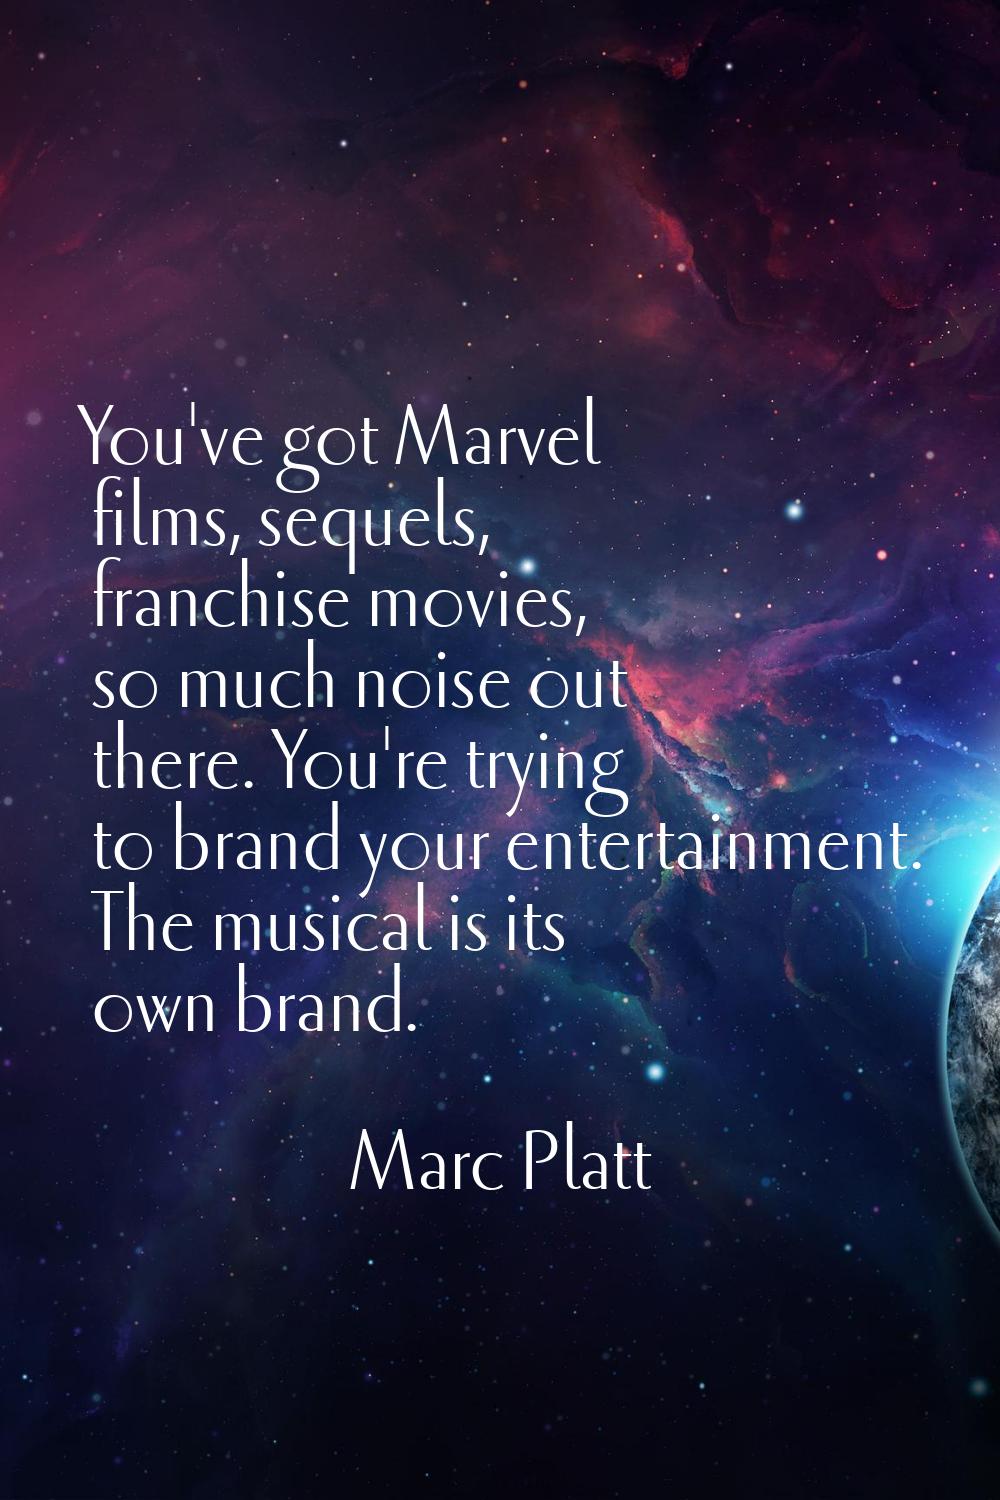 You've got Marvel films, sequels, franchise movies, so much noise out there. You're trying to brand